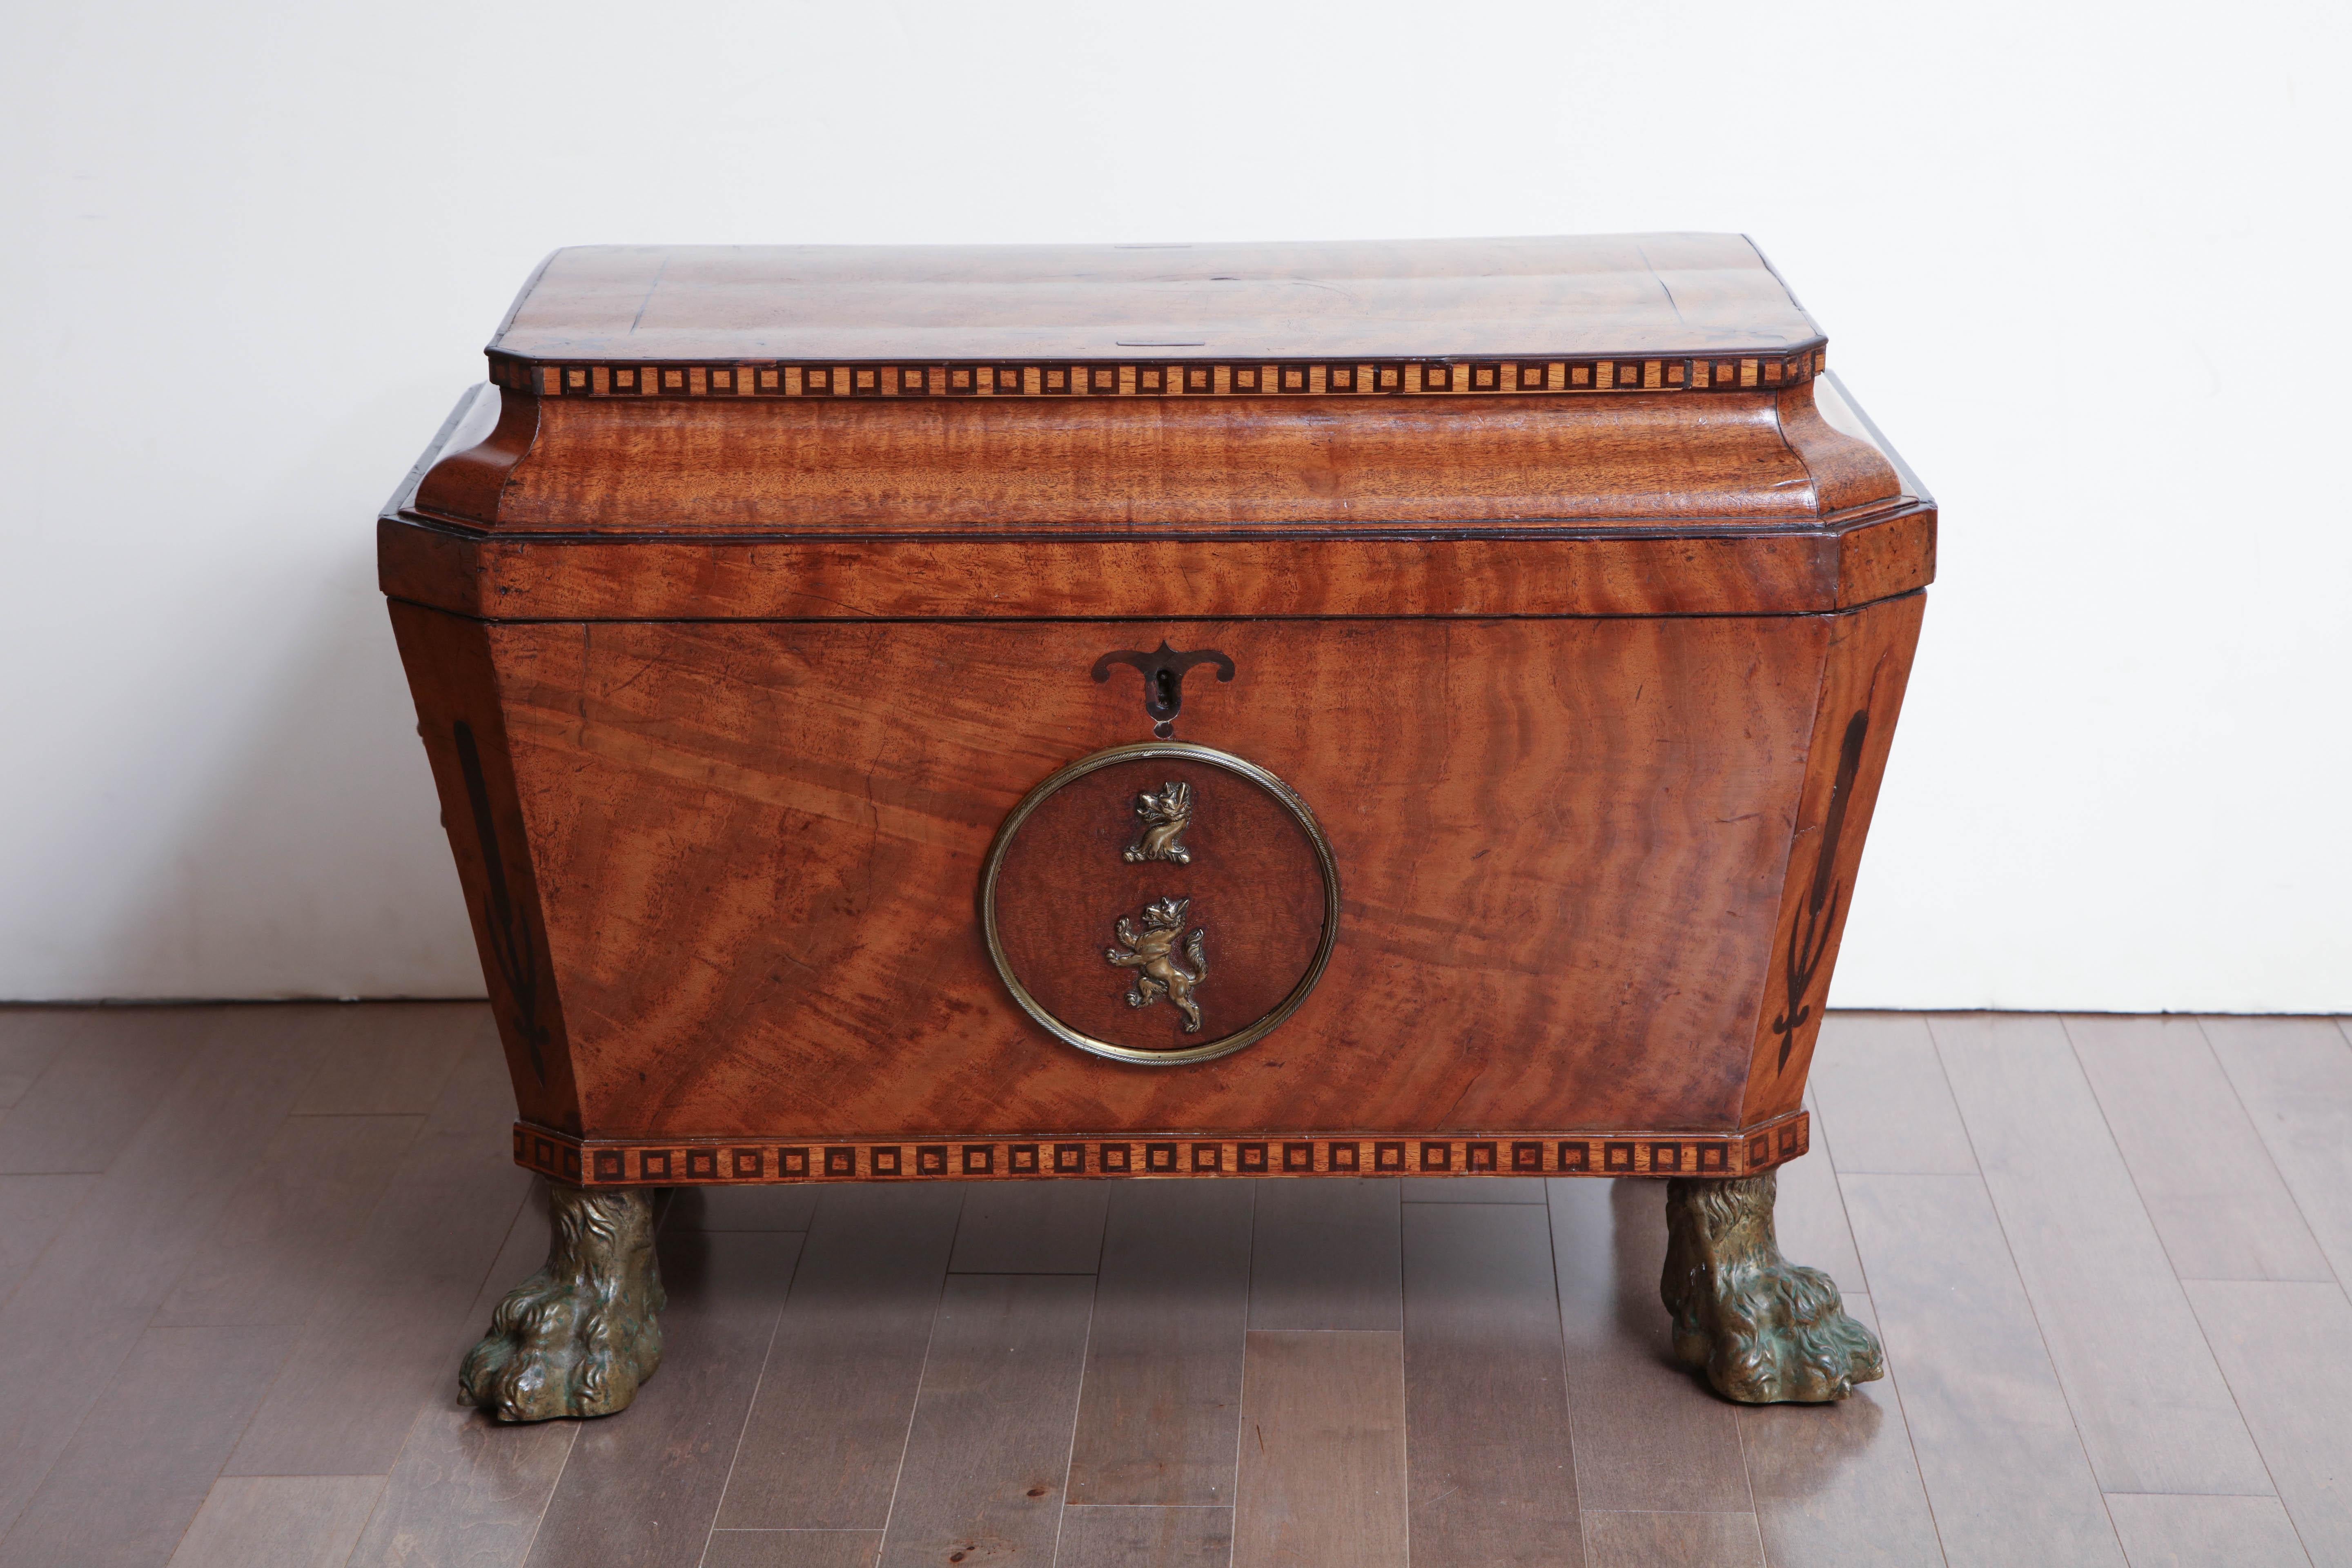 English Regency, mahogany and bronze-mounted cellarette with removable zinc liner.